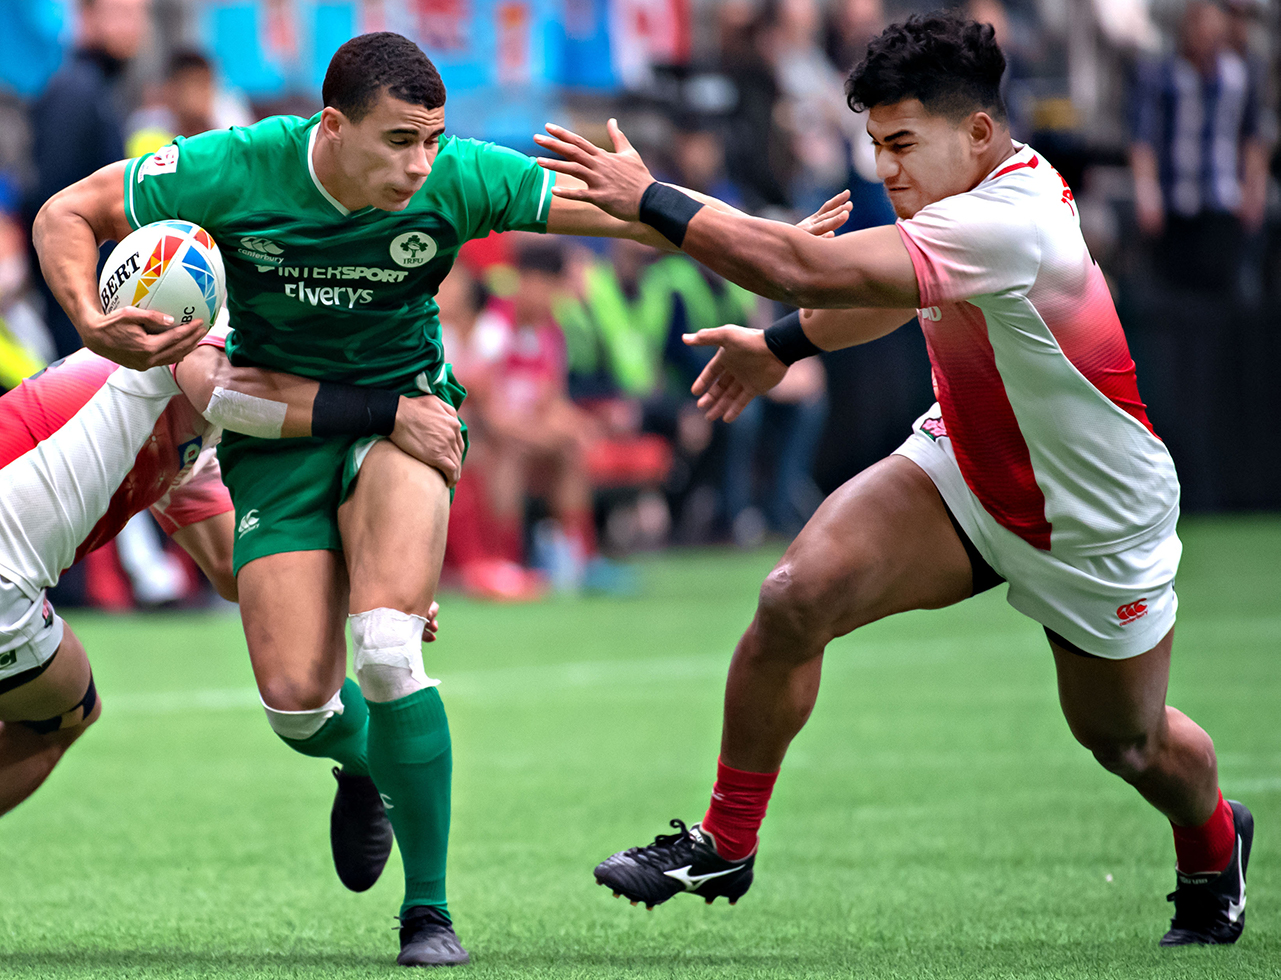 Jordan Conroy (L) of Ireland and Timo Fiti Sufia of Japan compete during their 13th place semifinal match of the HSBC World Rugby Seven Series at BC Place in Vancouver